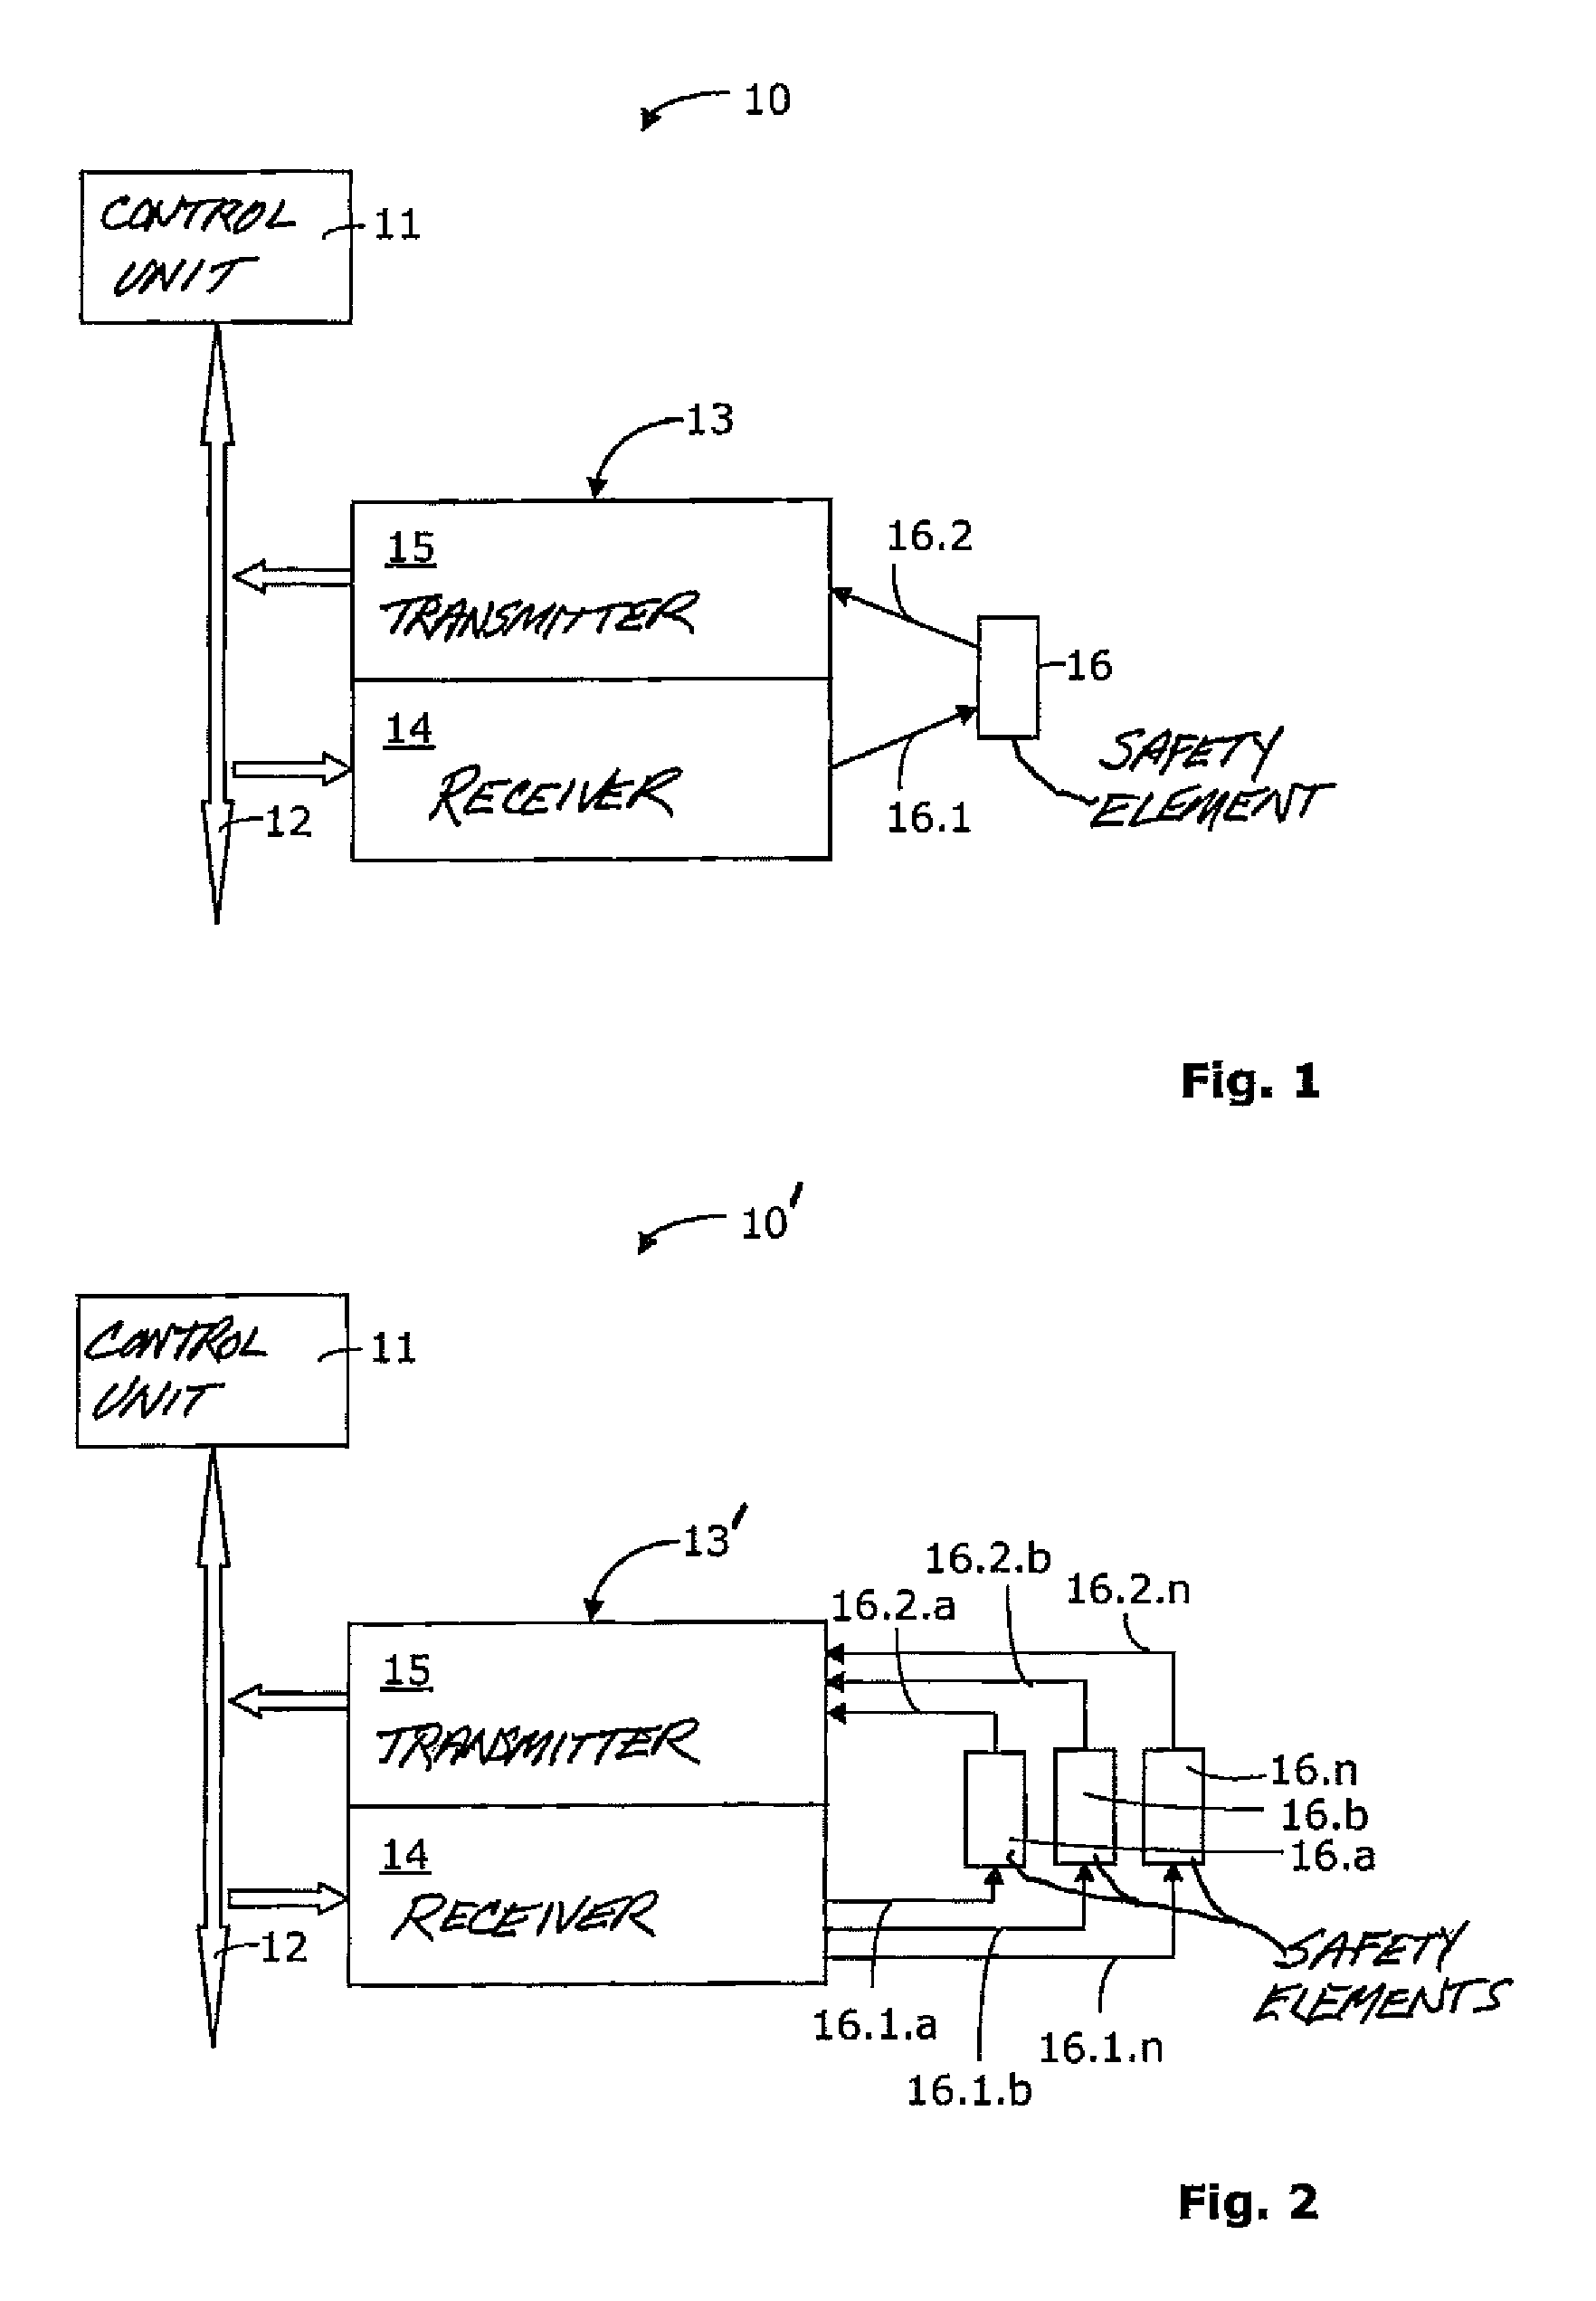 Monitoring method for an elevator installation